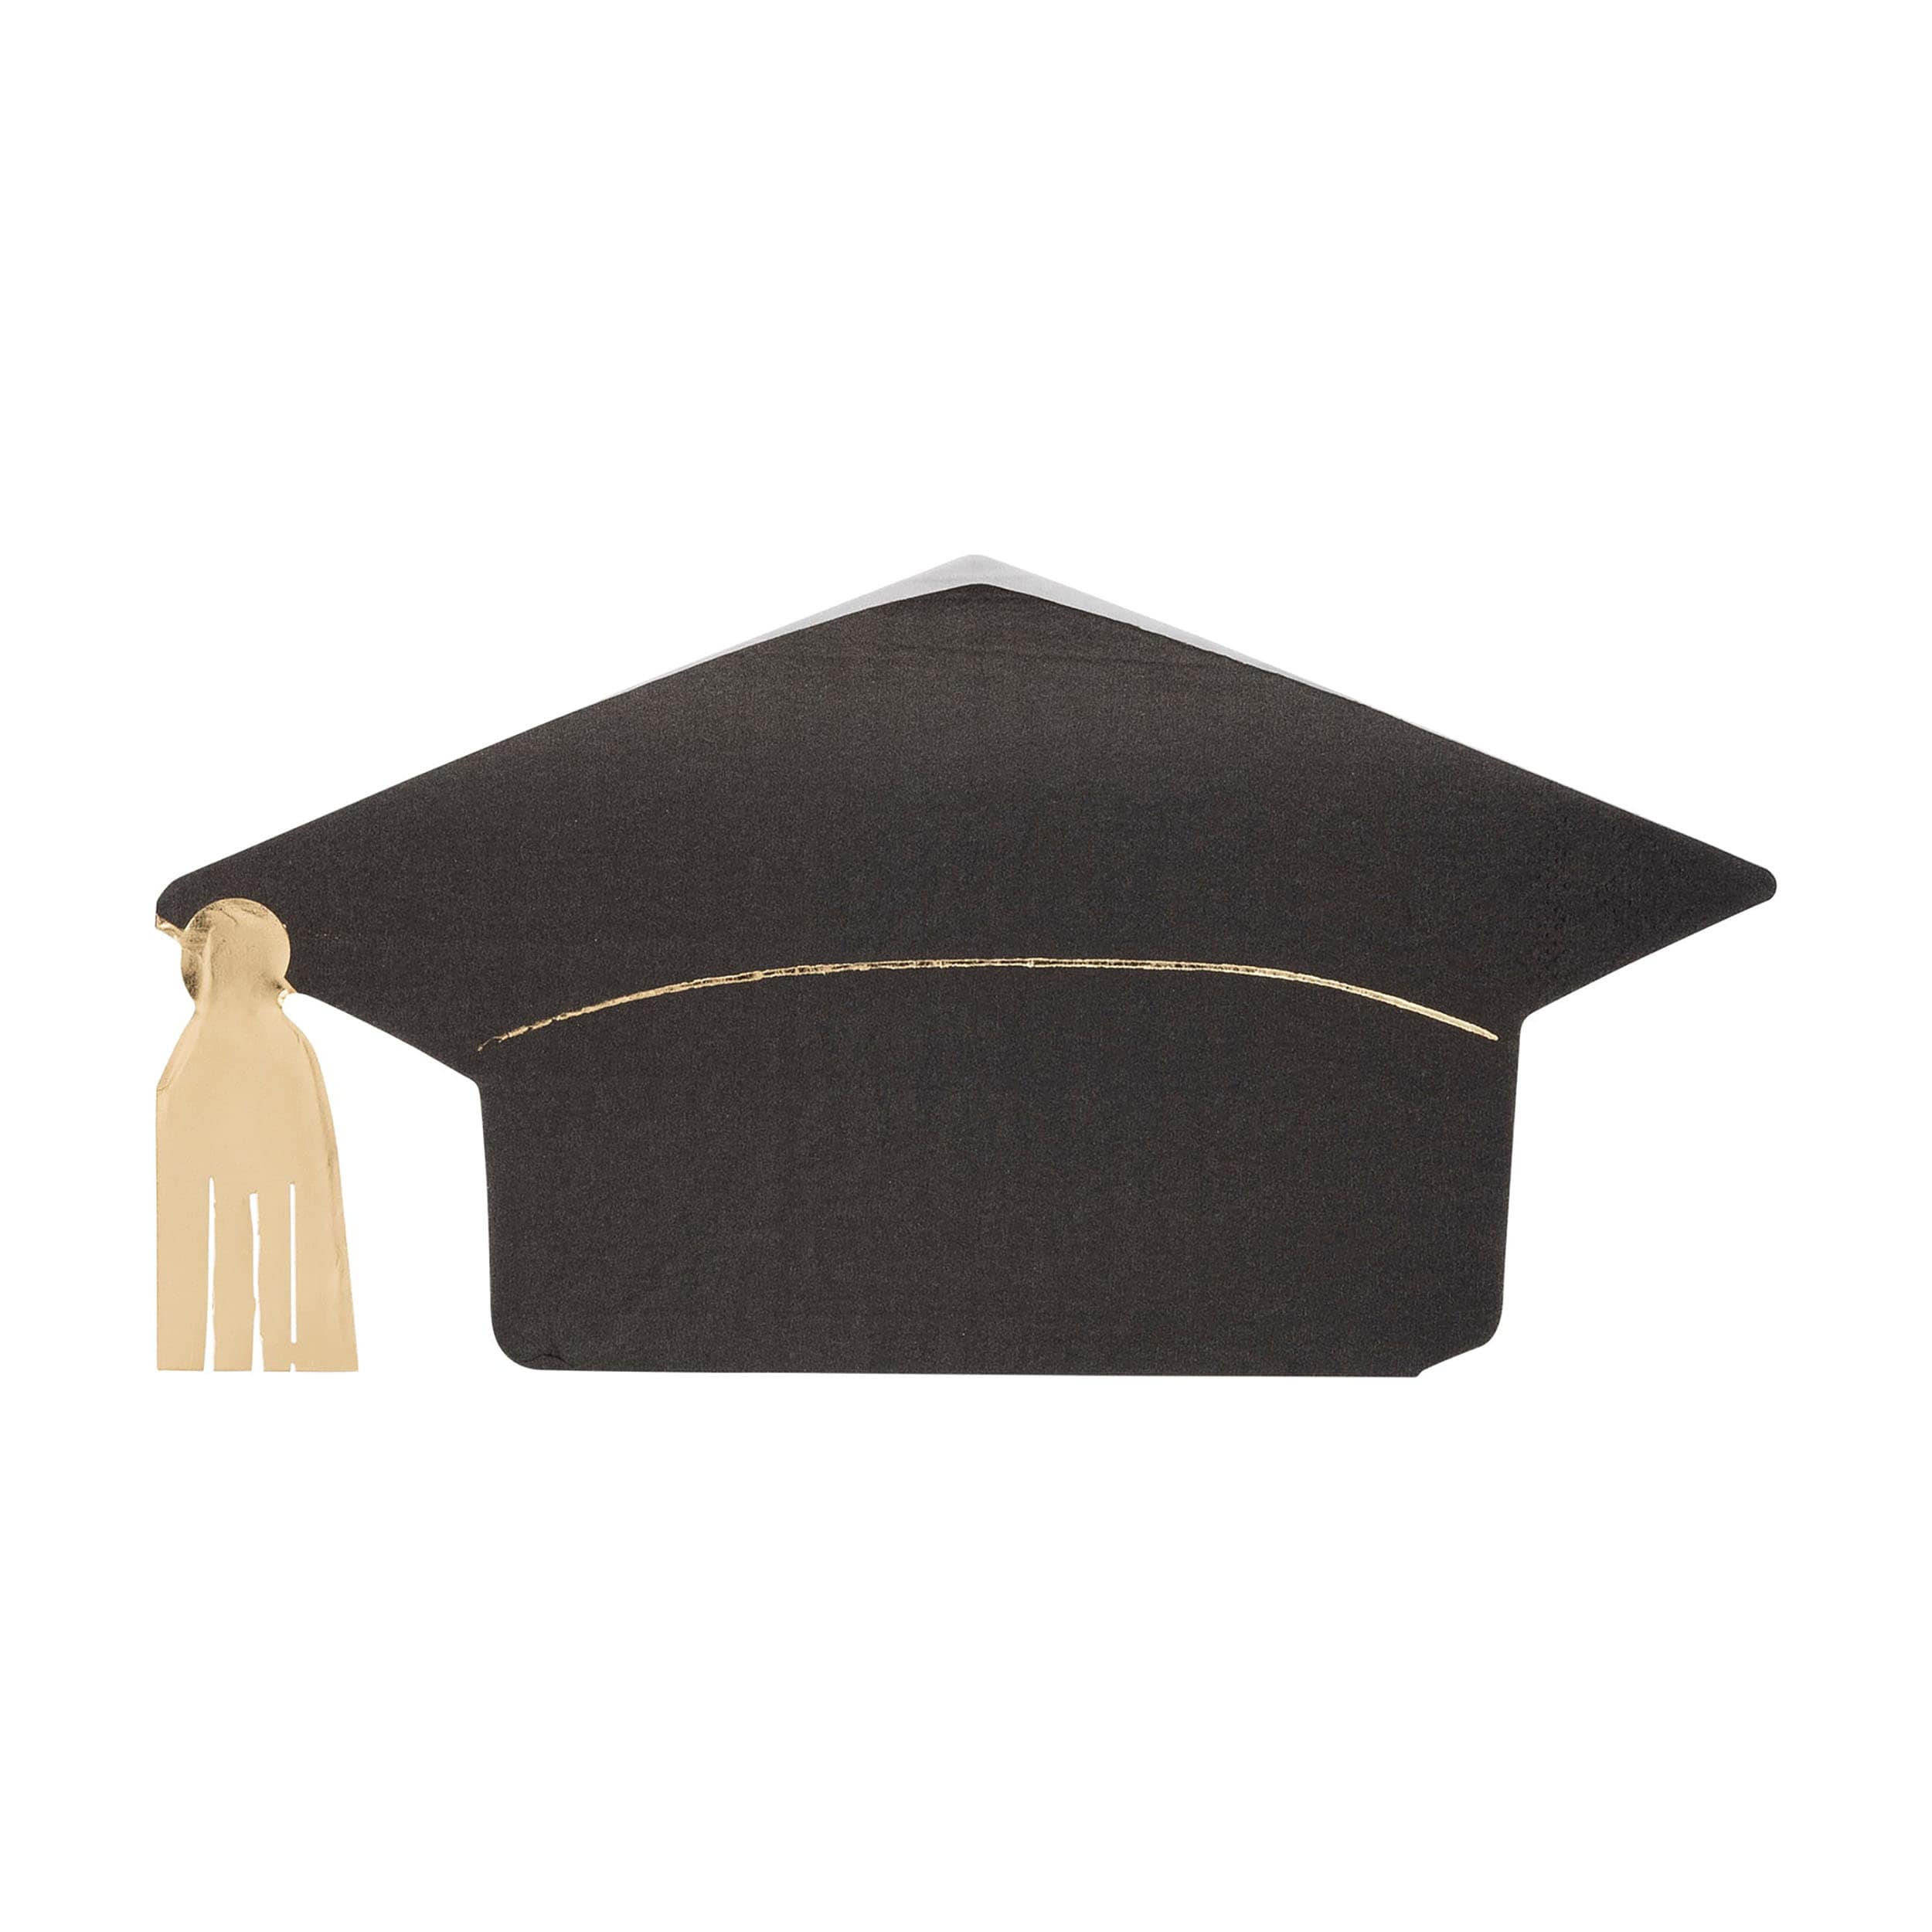 Graduation Napkins with a shaped napkin with a grad cap and tassel design.